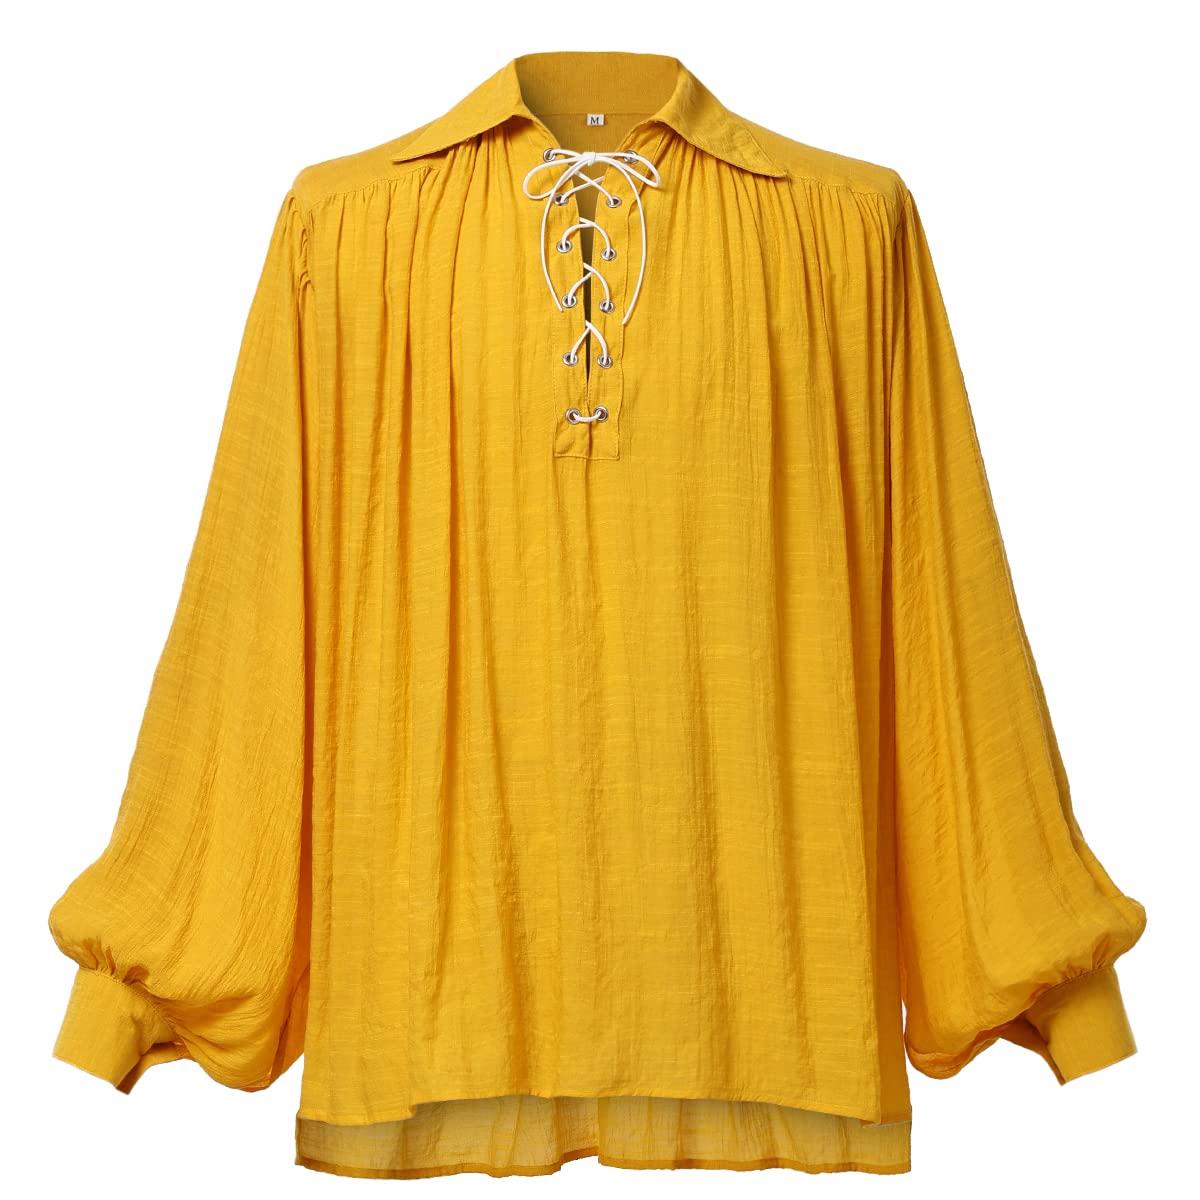 GRACEART Medieval Poet's Pirate Oversized Shirt Renaissance Festival Outfit Casual Wear Tops for Men or Women Yellow